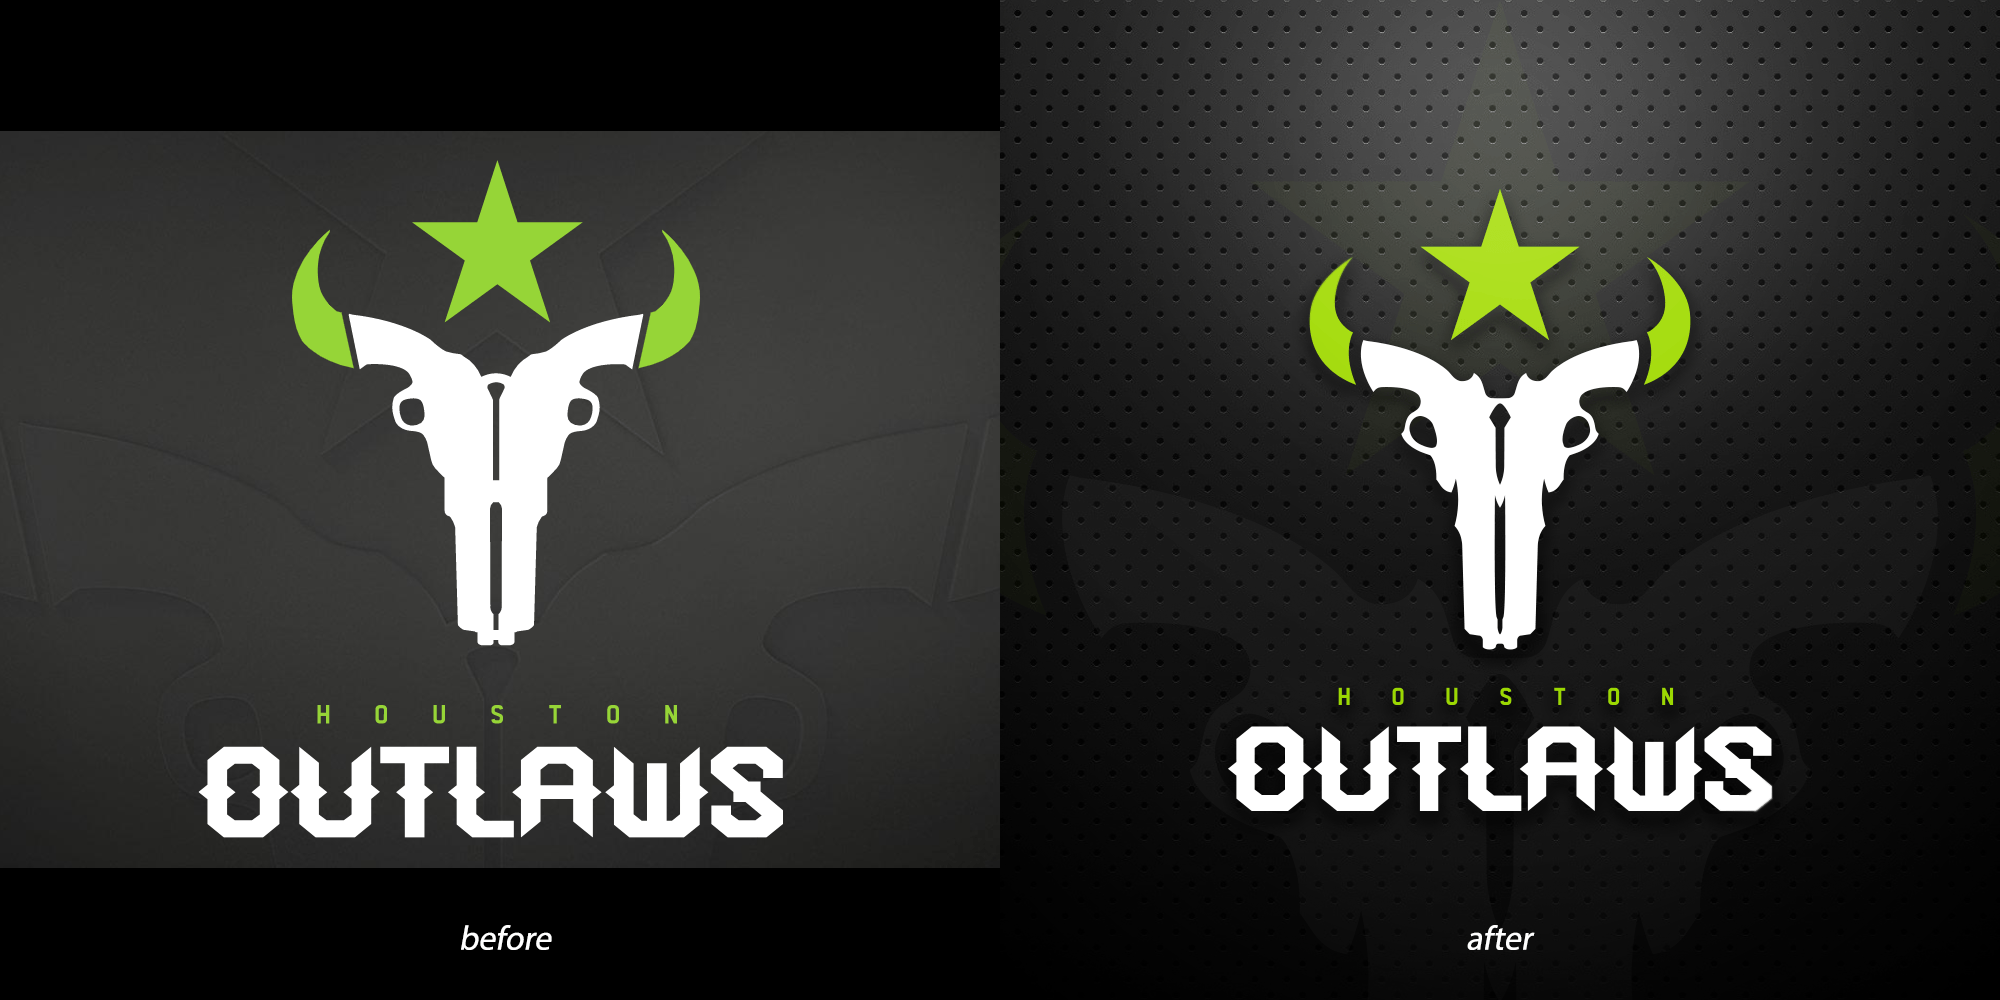 Outlaws Logo - I redid the Outlaws logo to make it a bit less derpy